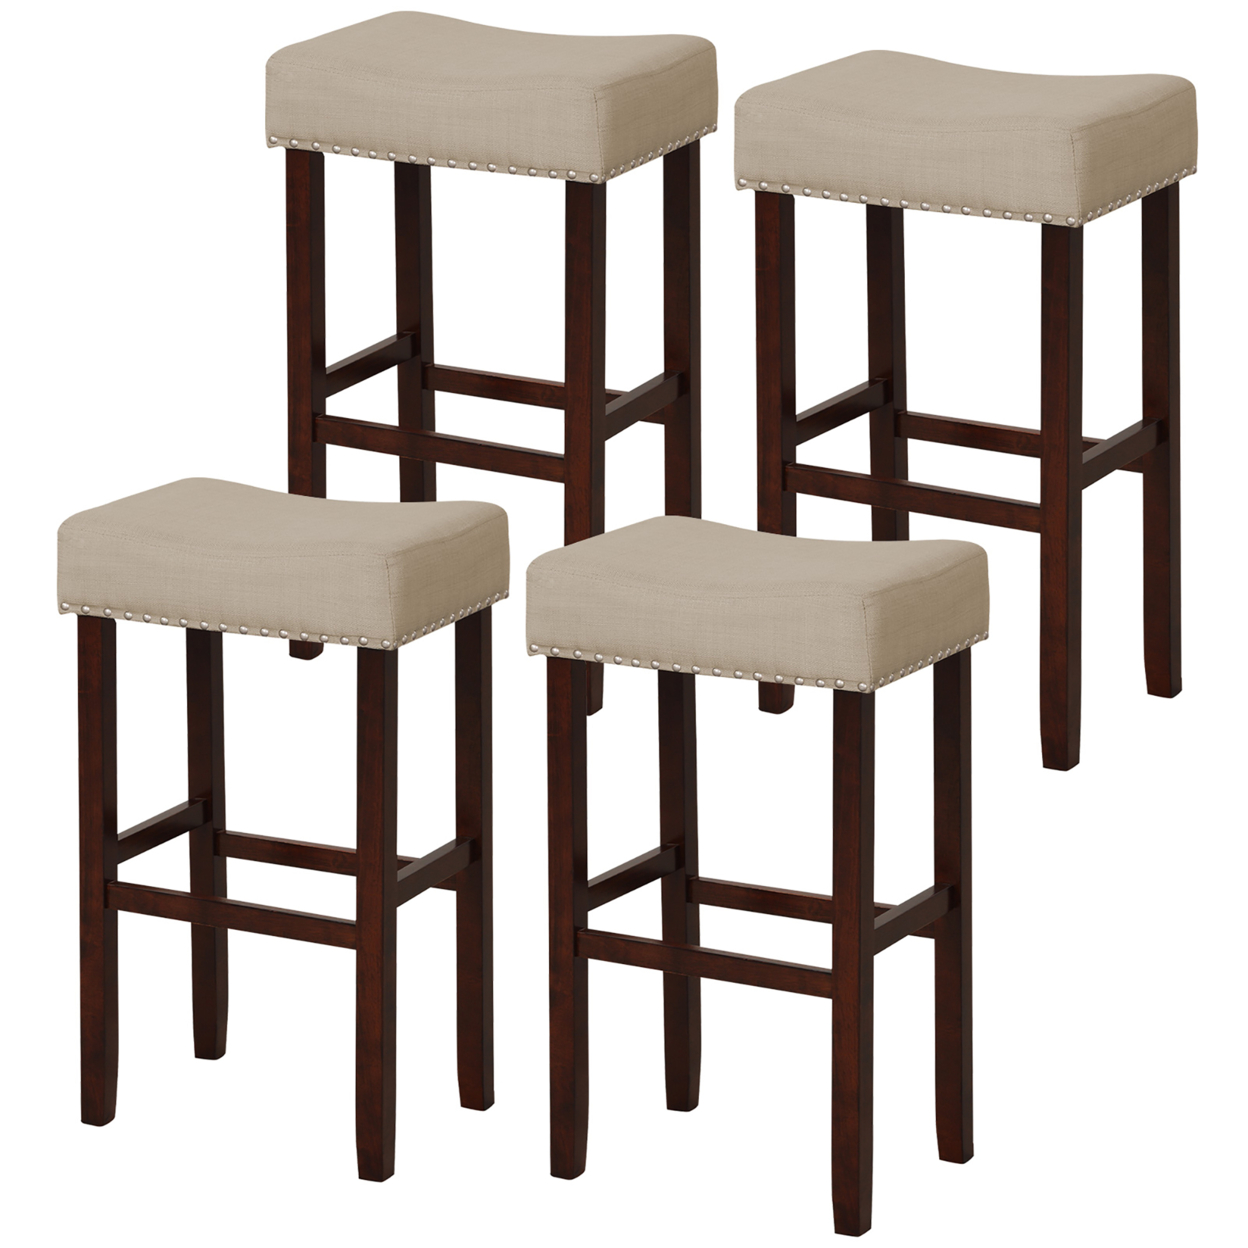 Set Of 4 Bar Stools Bar Height Saddle Kitchen Chairs W/ Wooden Legs Beige